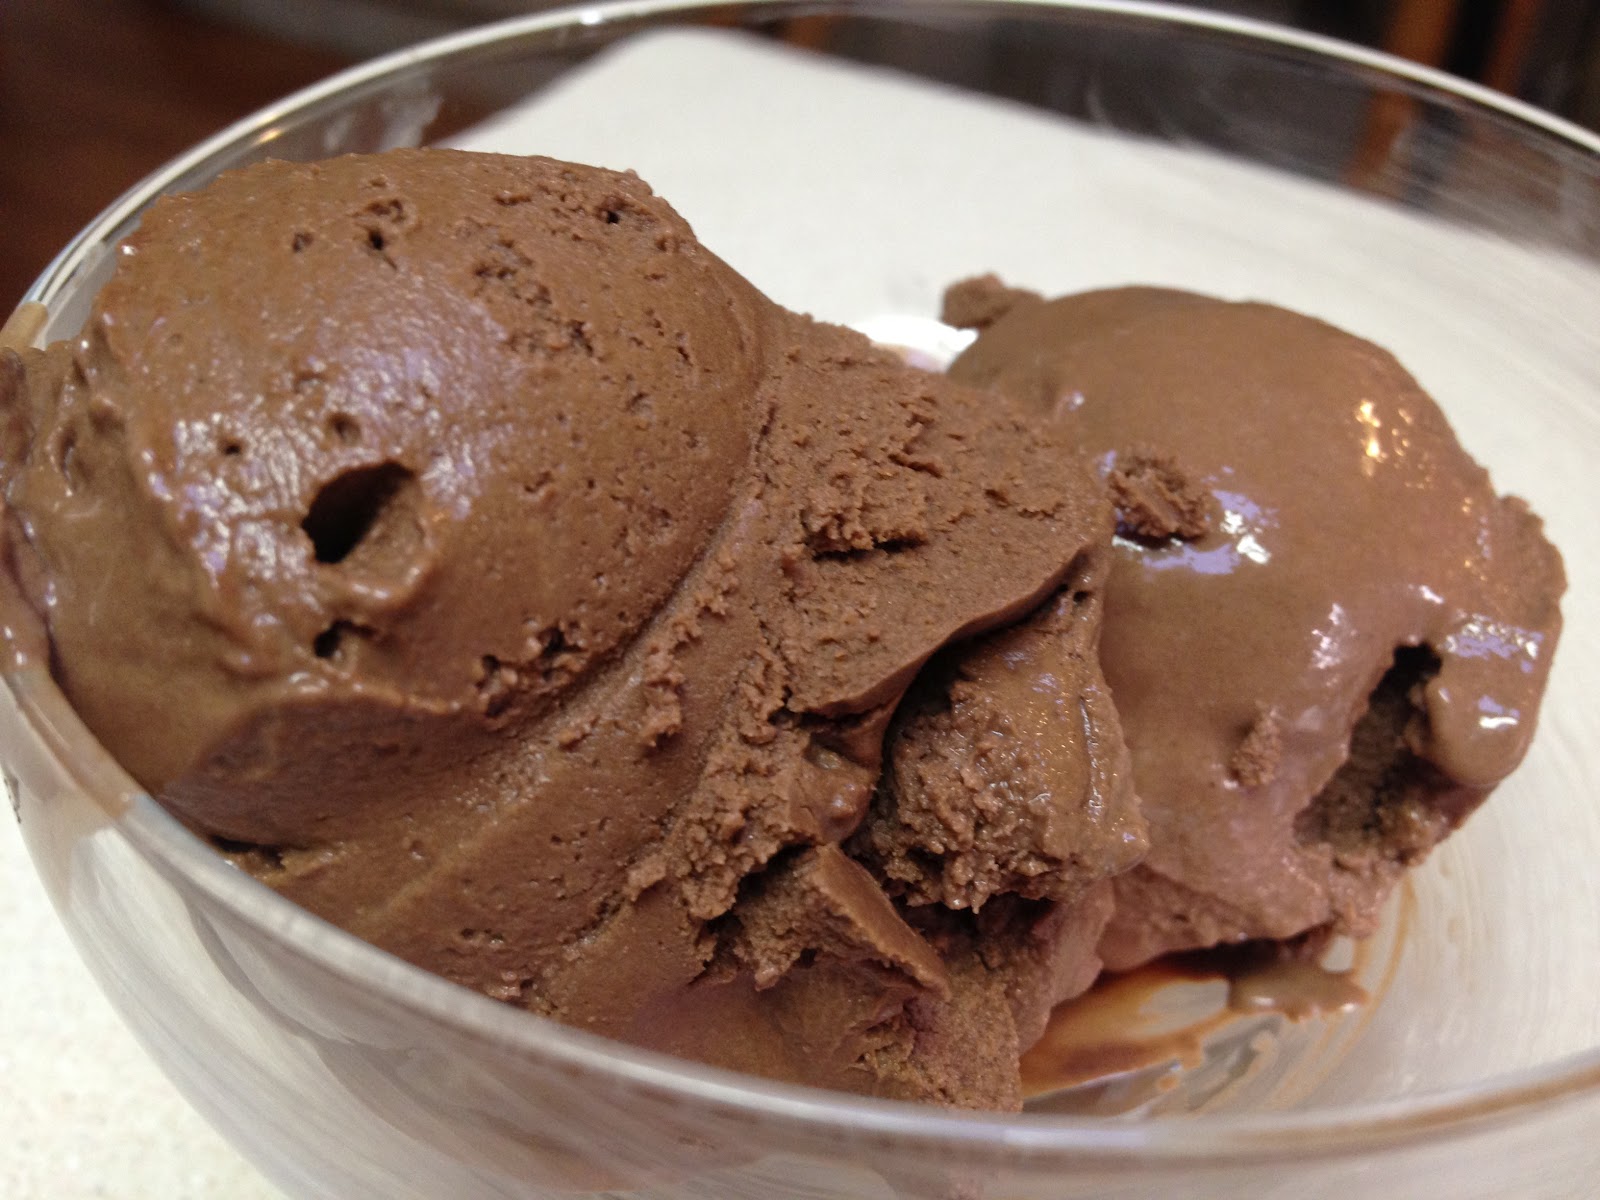 For the love of nutritiousness: Dutch Chocolate Frozen Yogurt